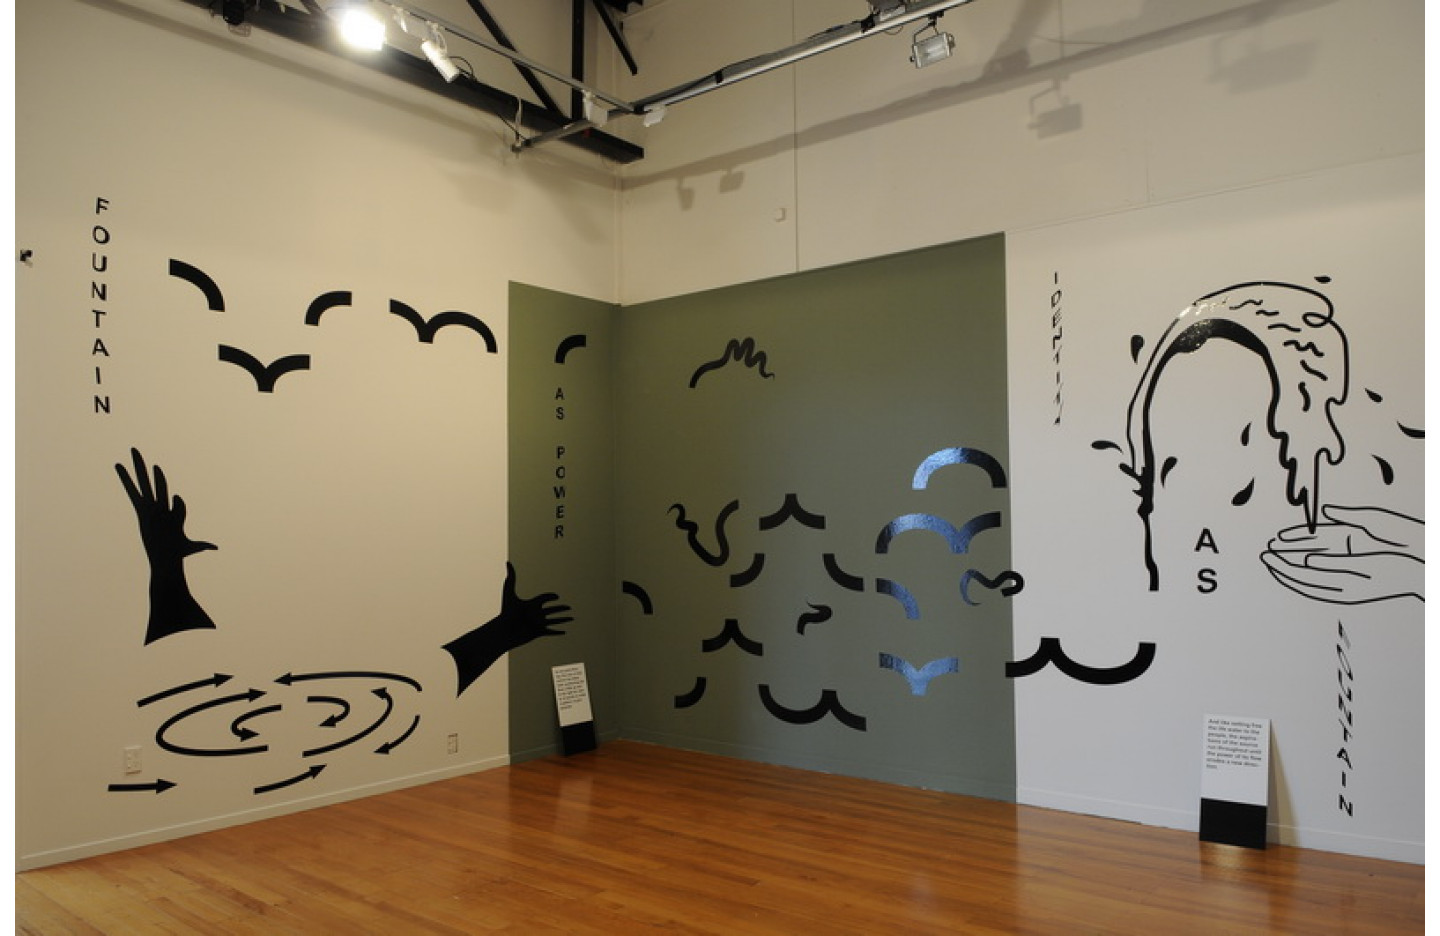 Speaking Places: How to work, Ramp Gallery (2015)